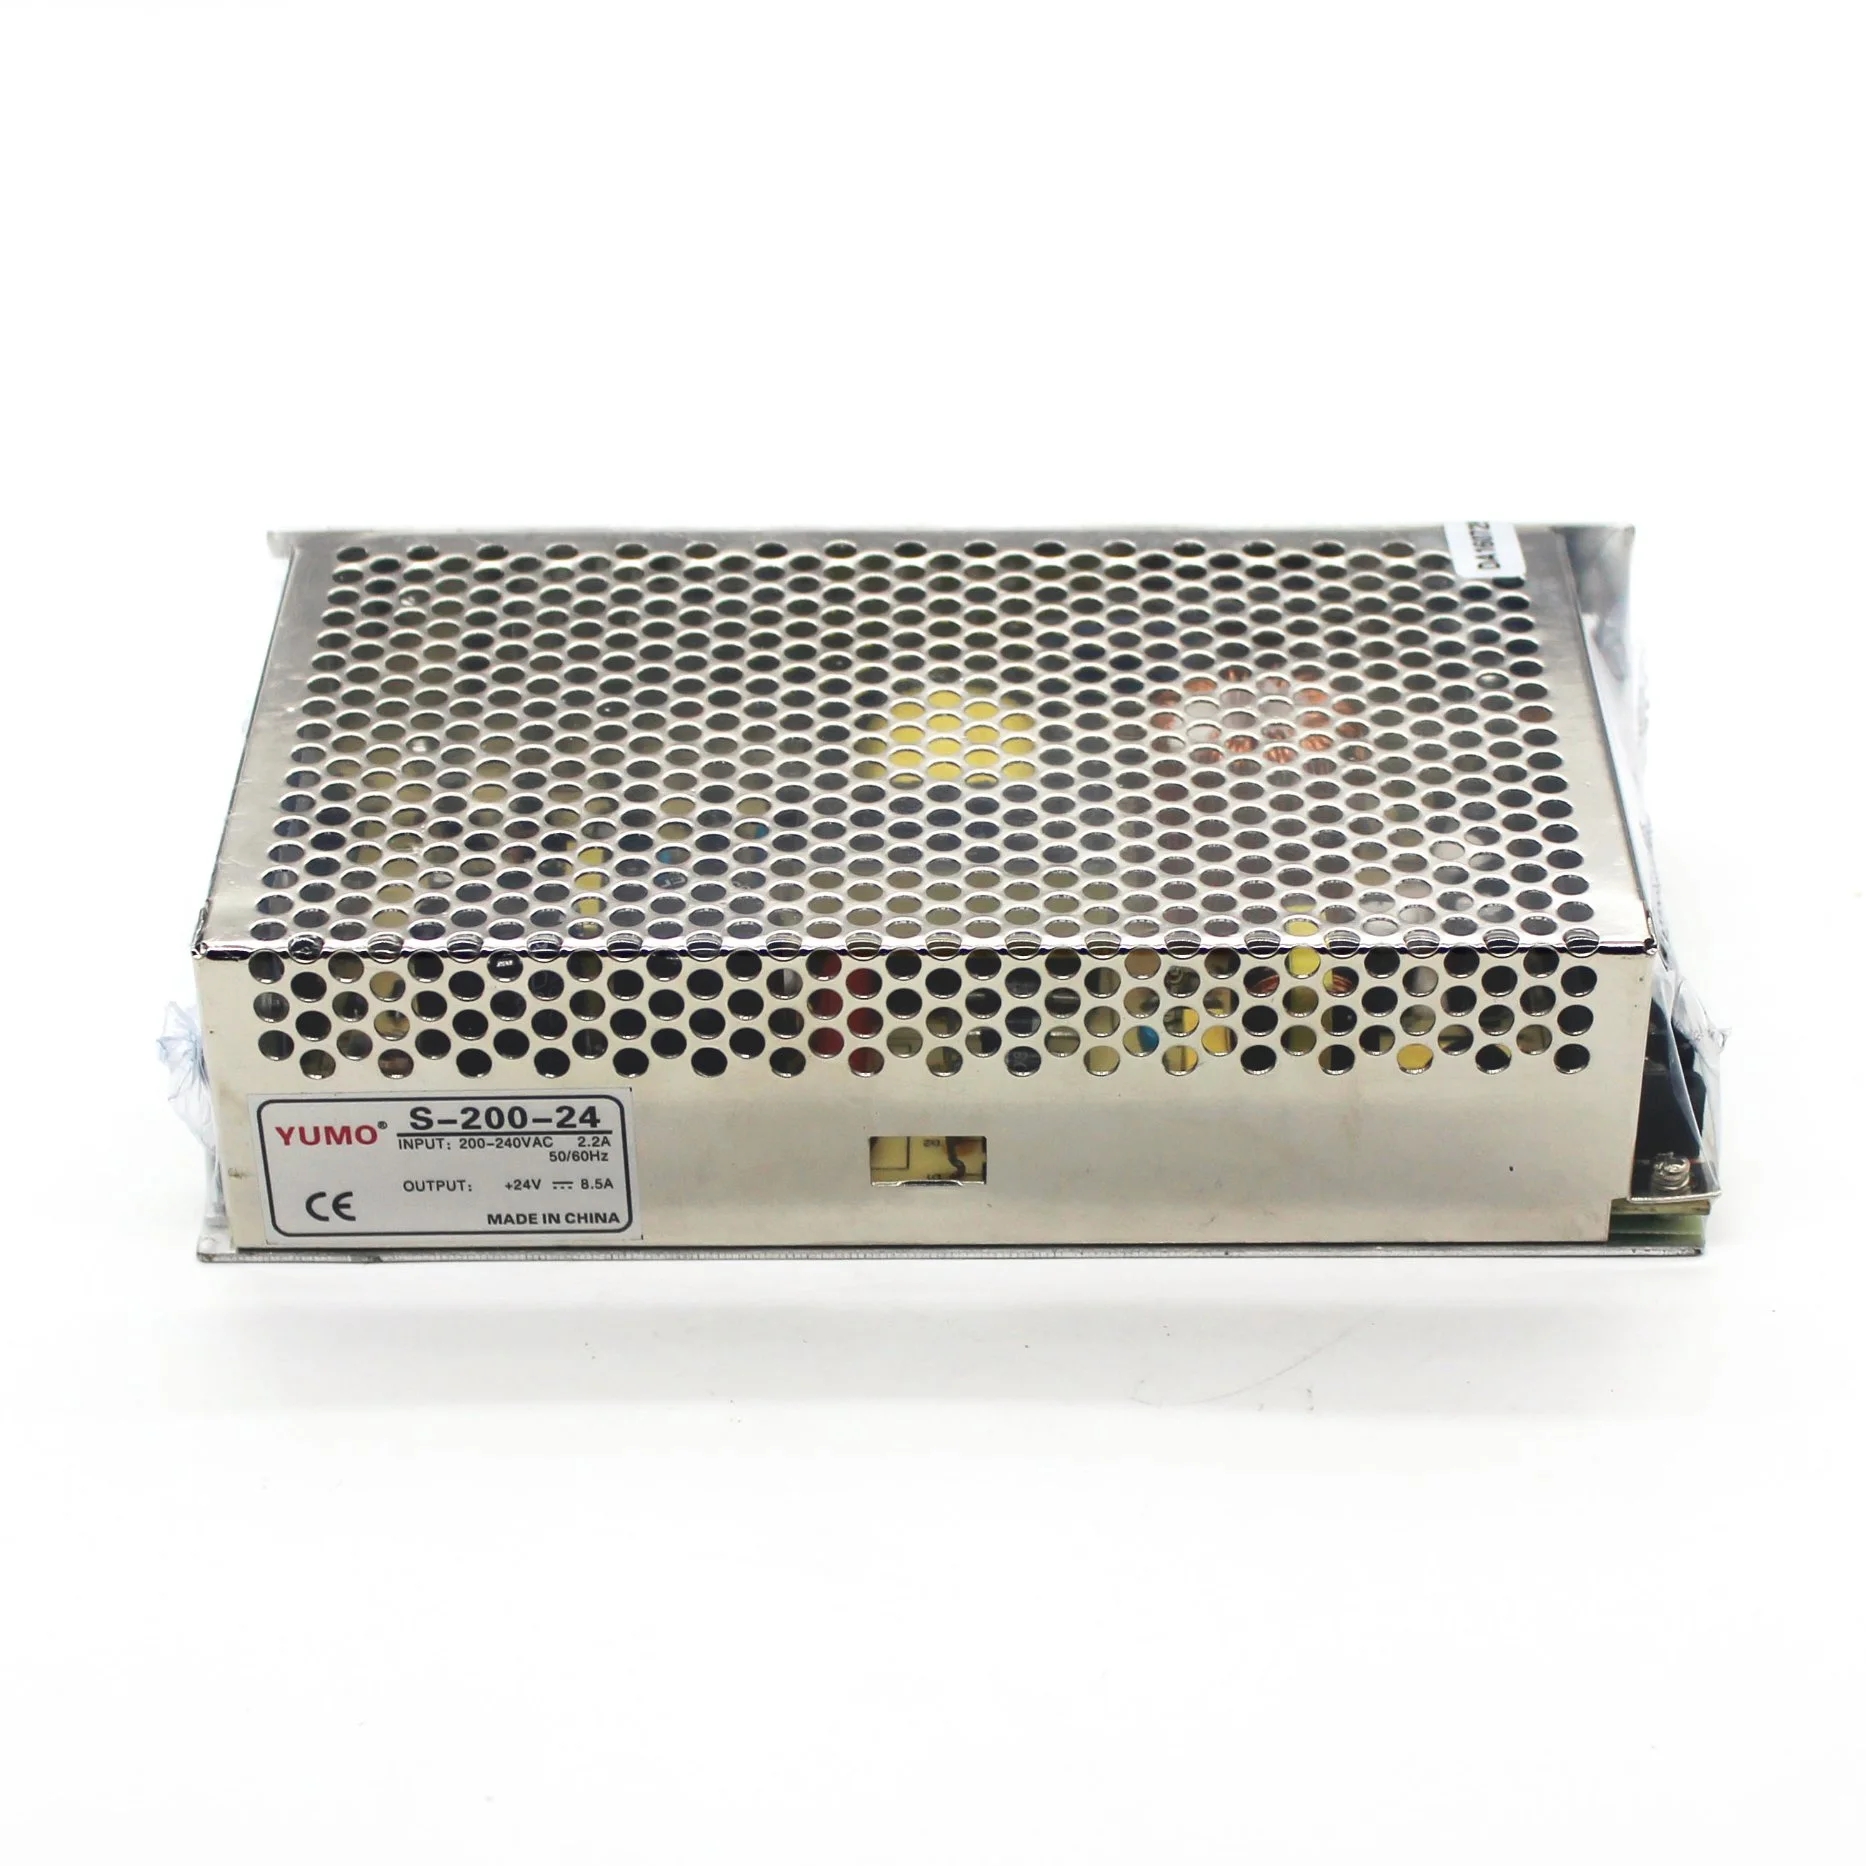 S-200-24 200W 24V Single Output Switching Power Supply